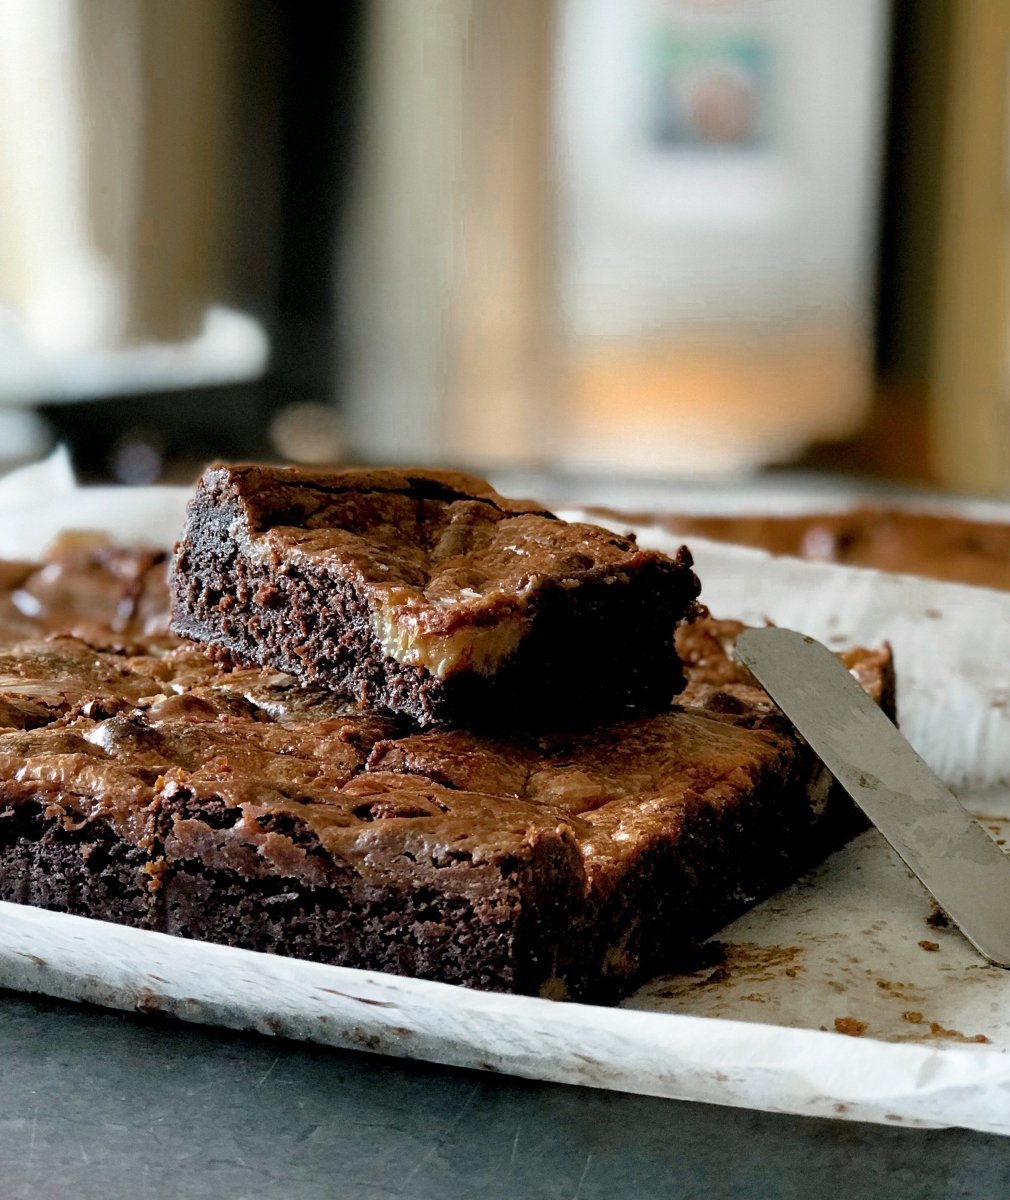 Chocolate brownie kit - The bakery by Knife & Fork